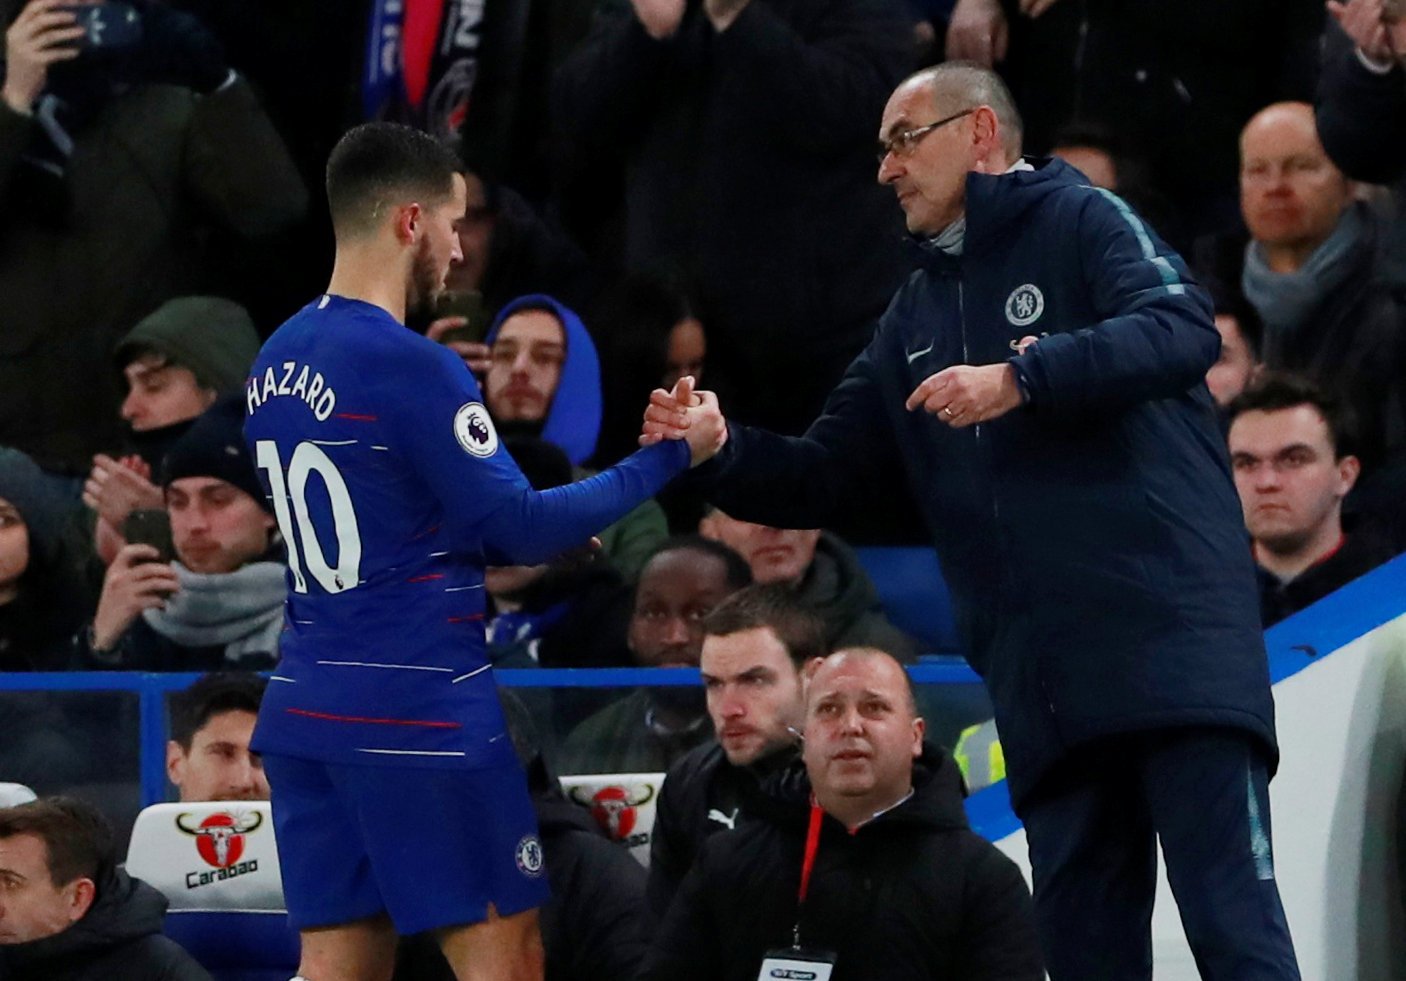 I will frustrate managers: Hazard